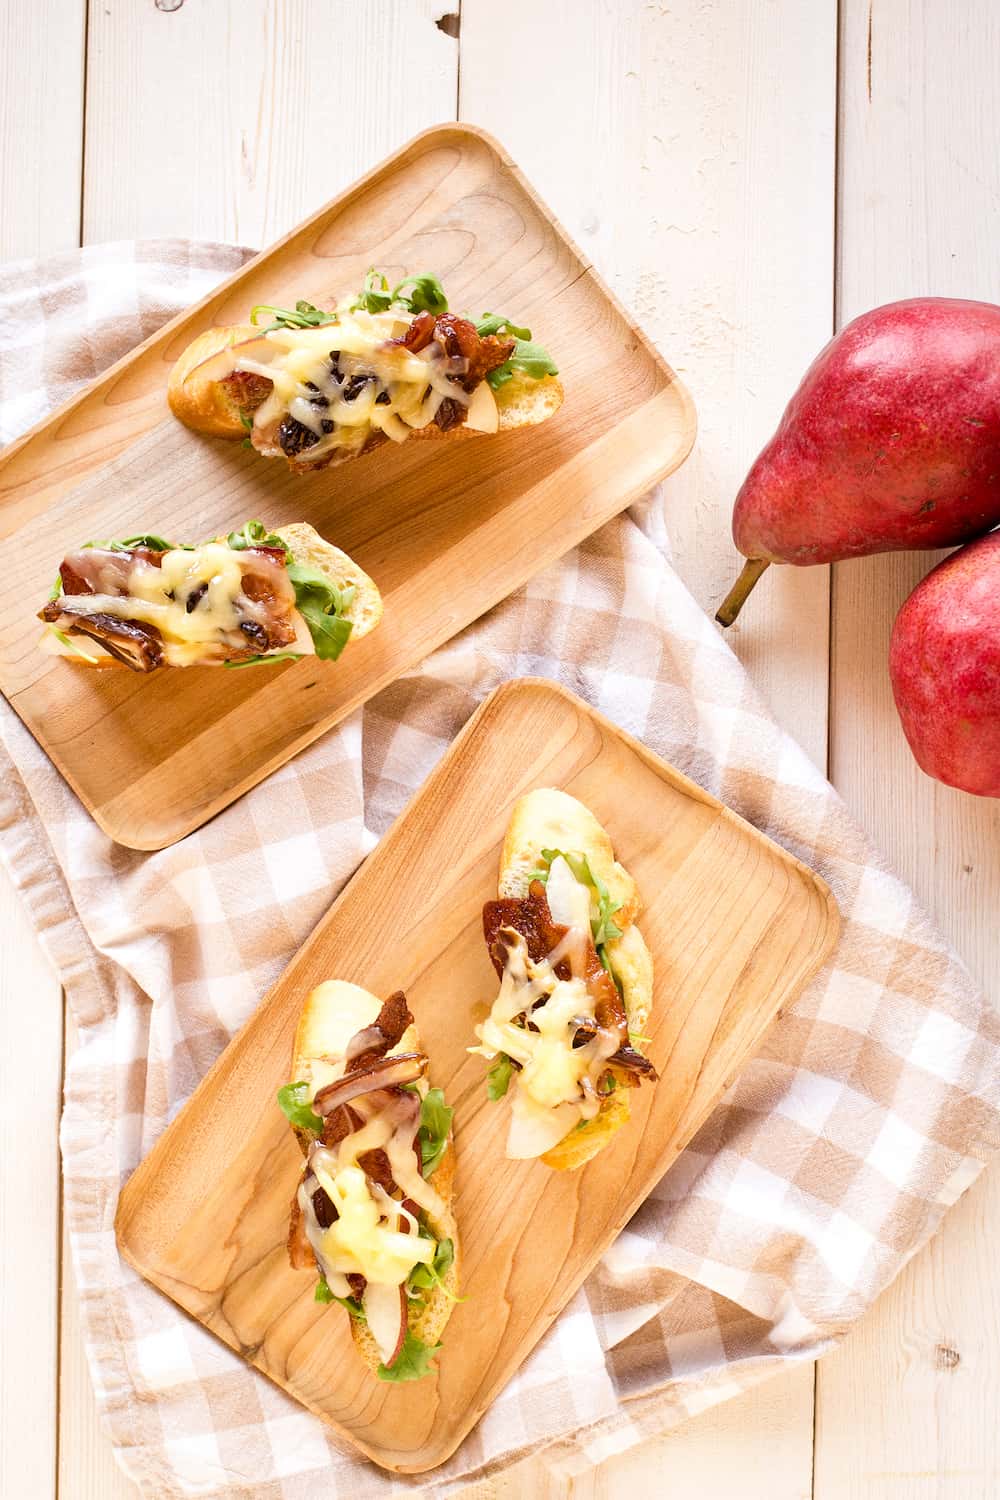 tartines topped with arugula, bacon, pears, dates, and cheese